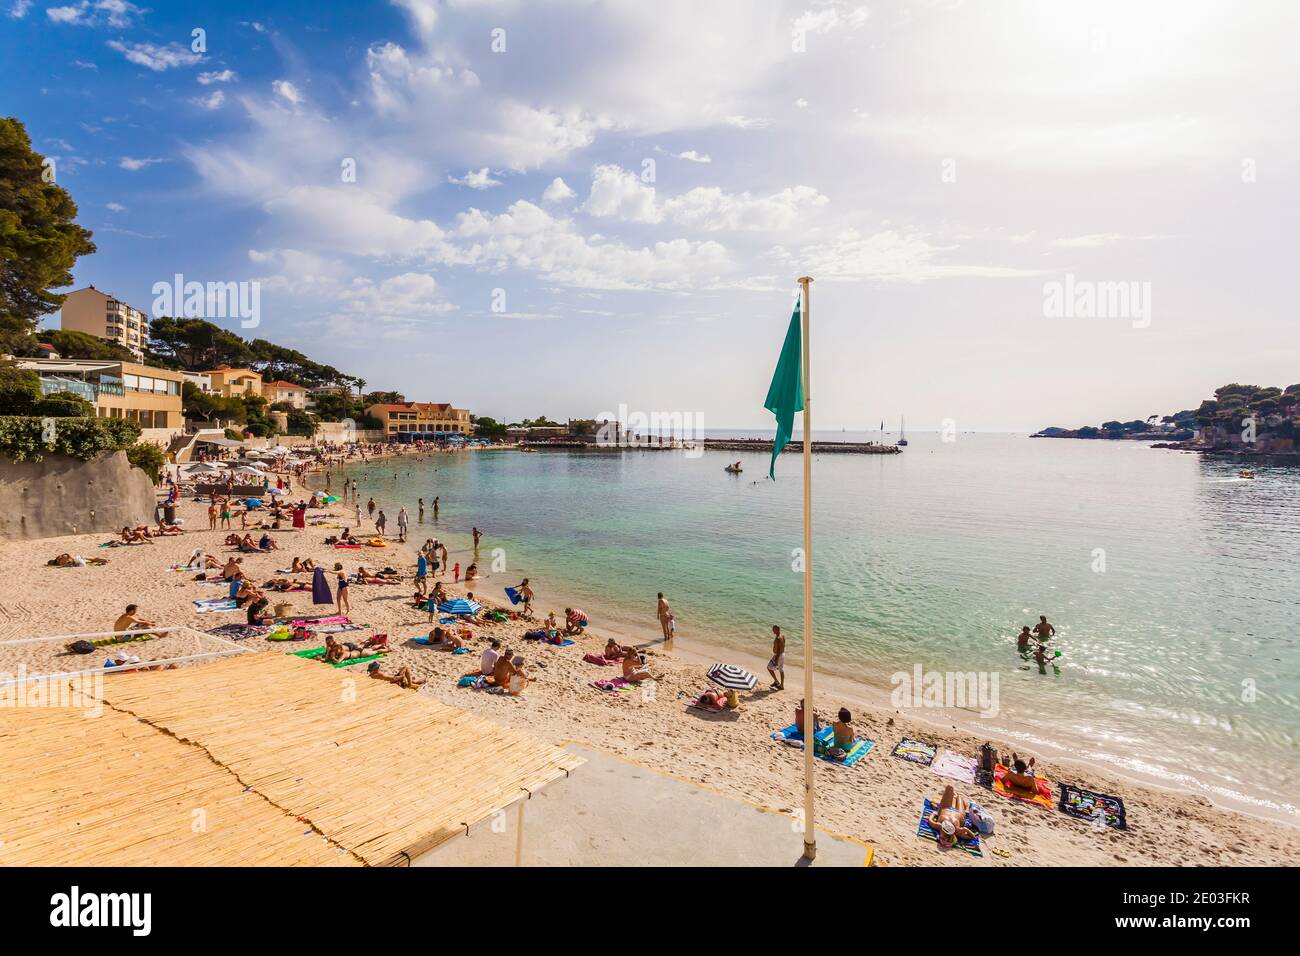 People at the beach in Bandol, Provence, France Stock Photo